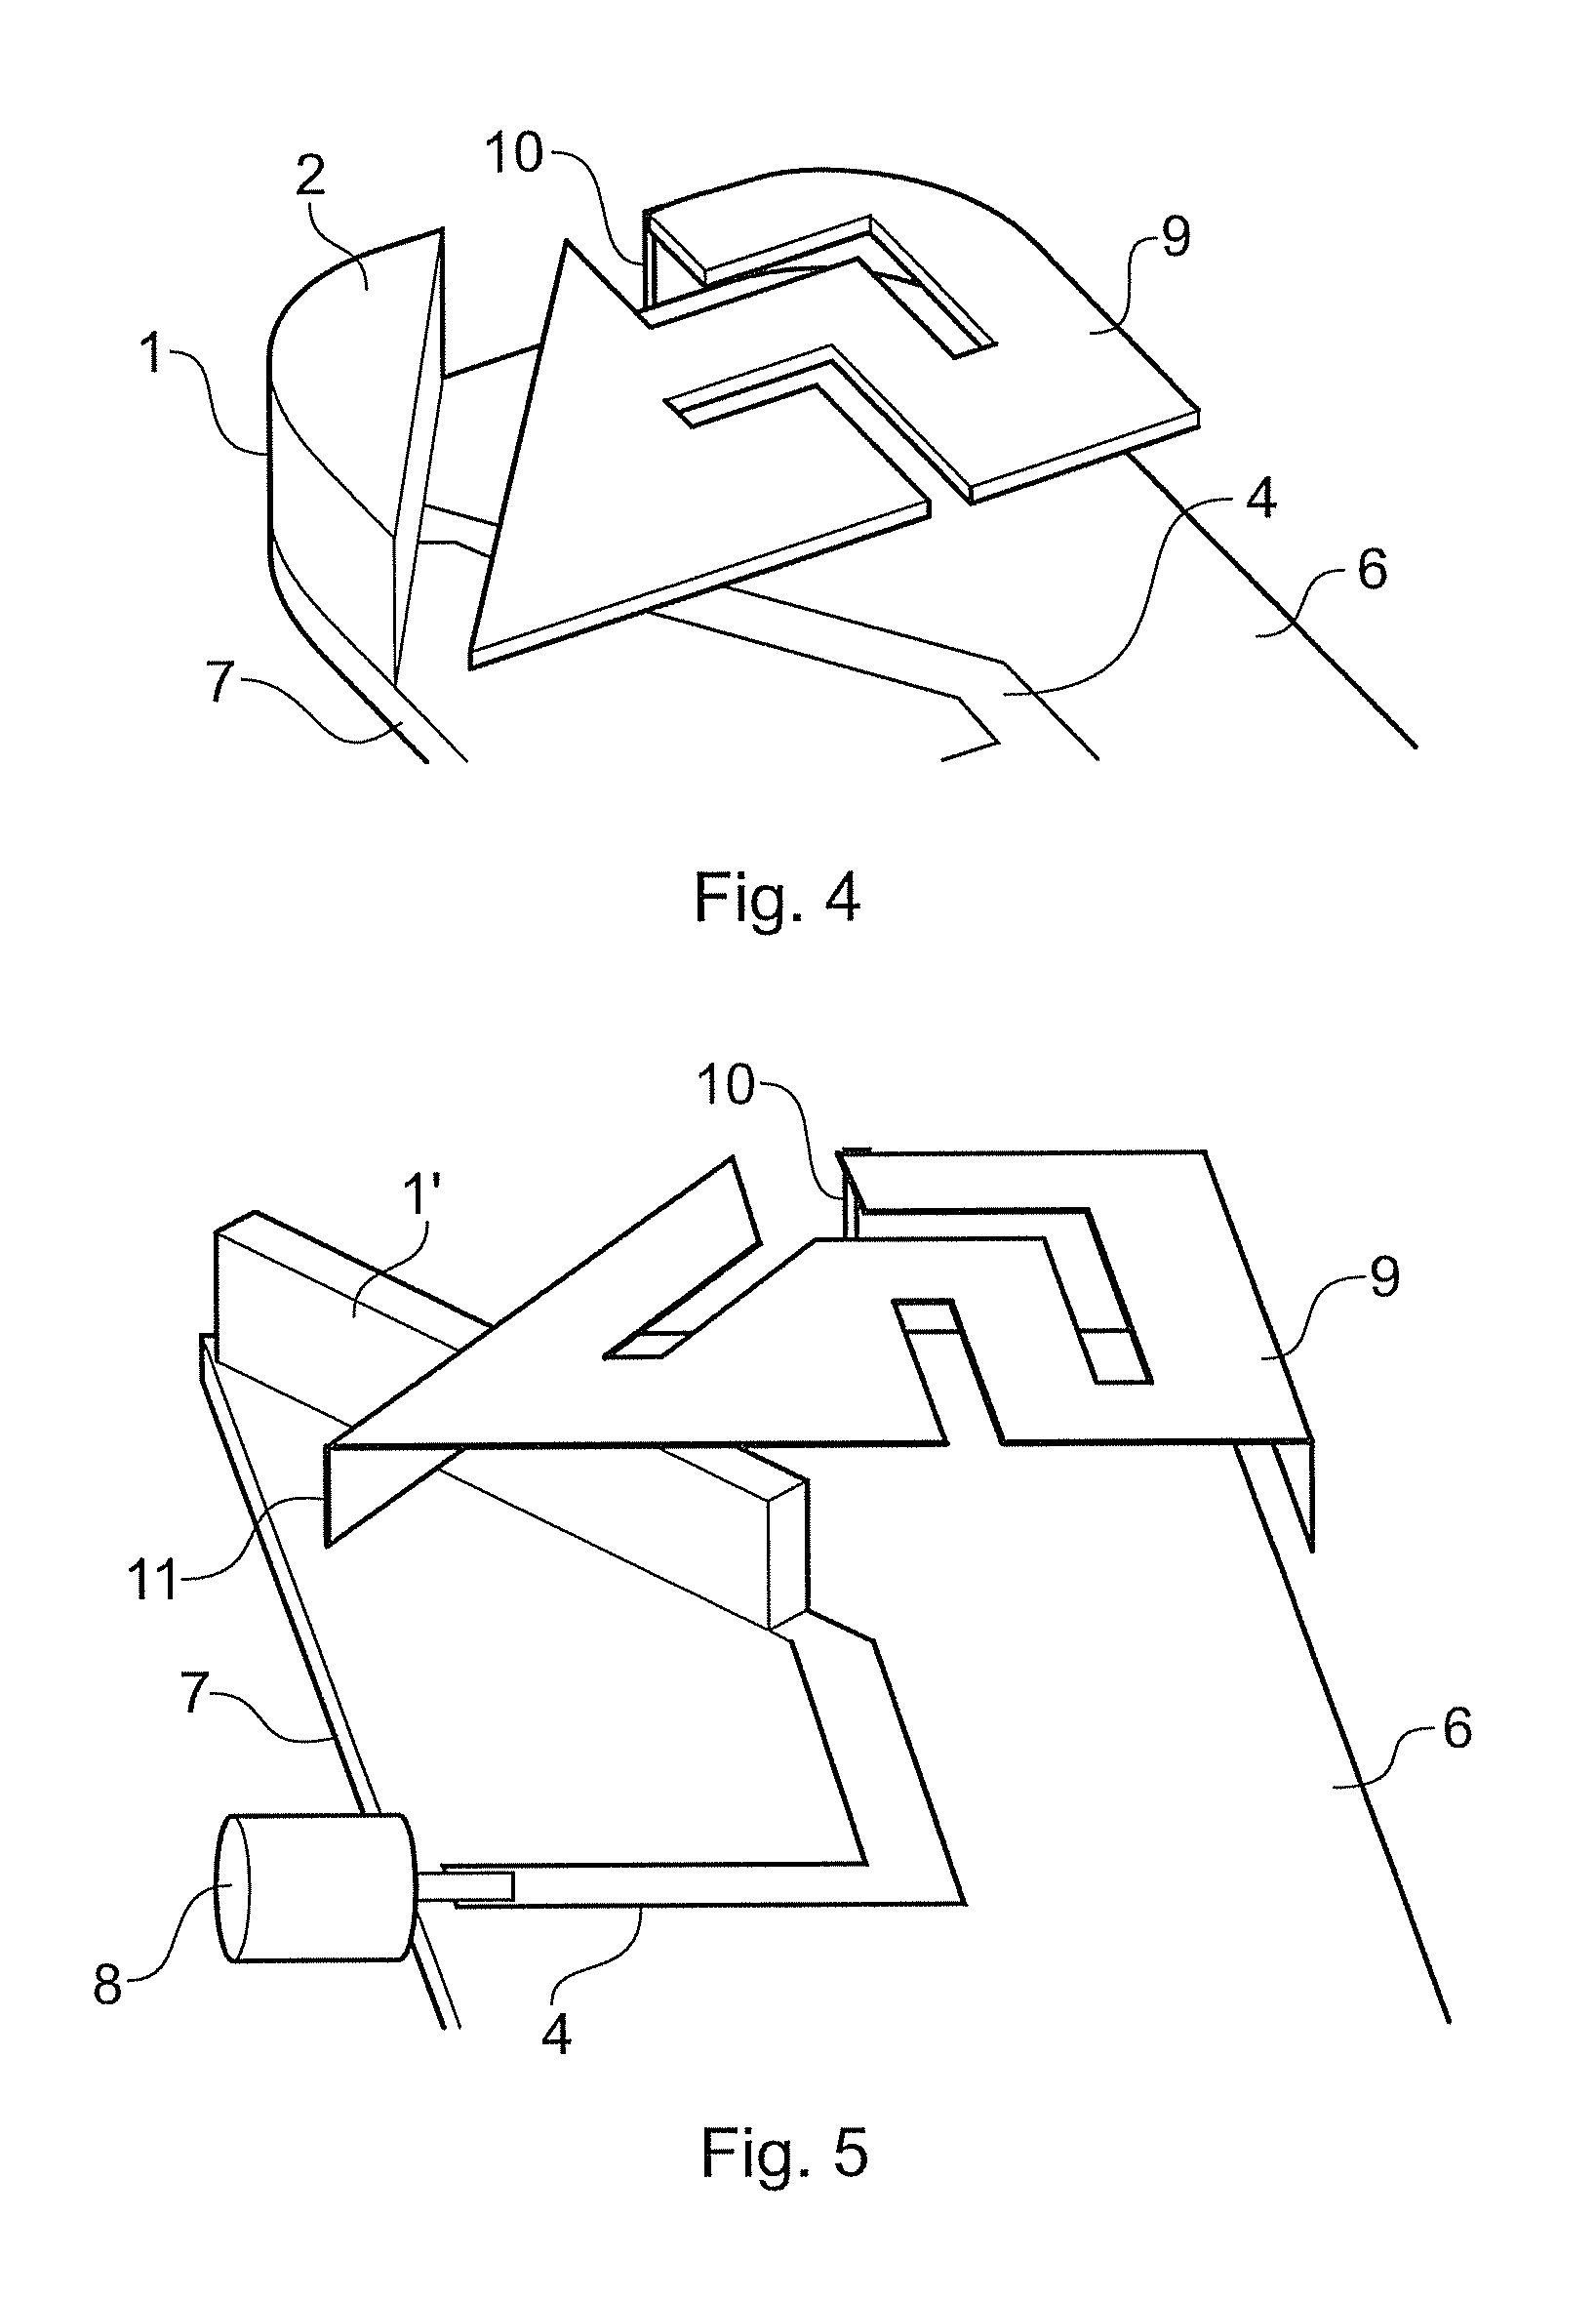 Hybrid antenna using parasitic excitation of conducting antennas by dielectric antennas